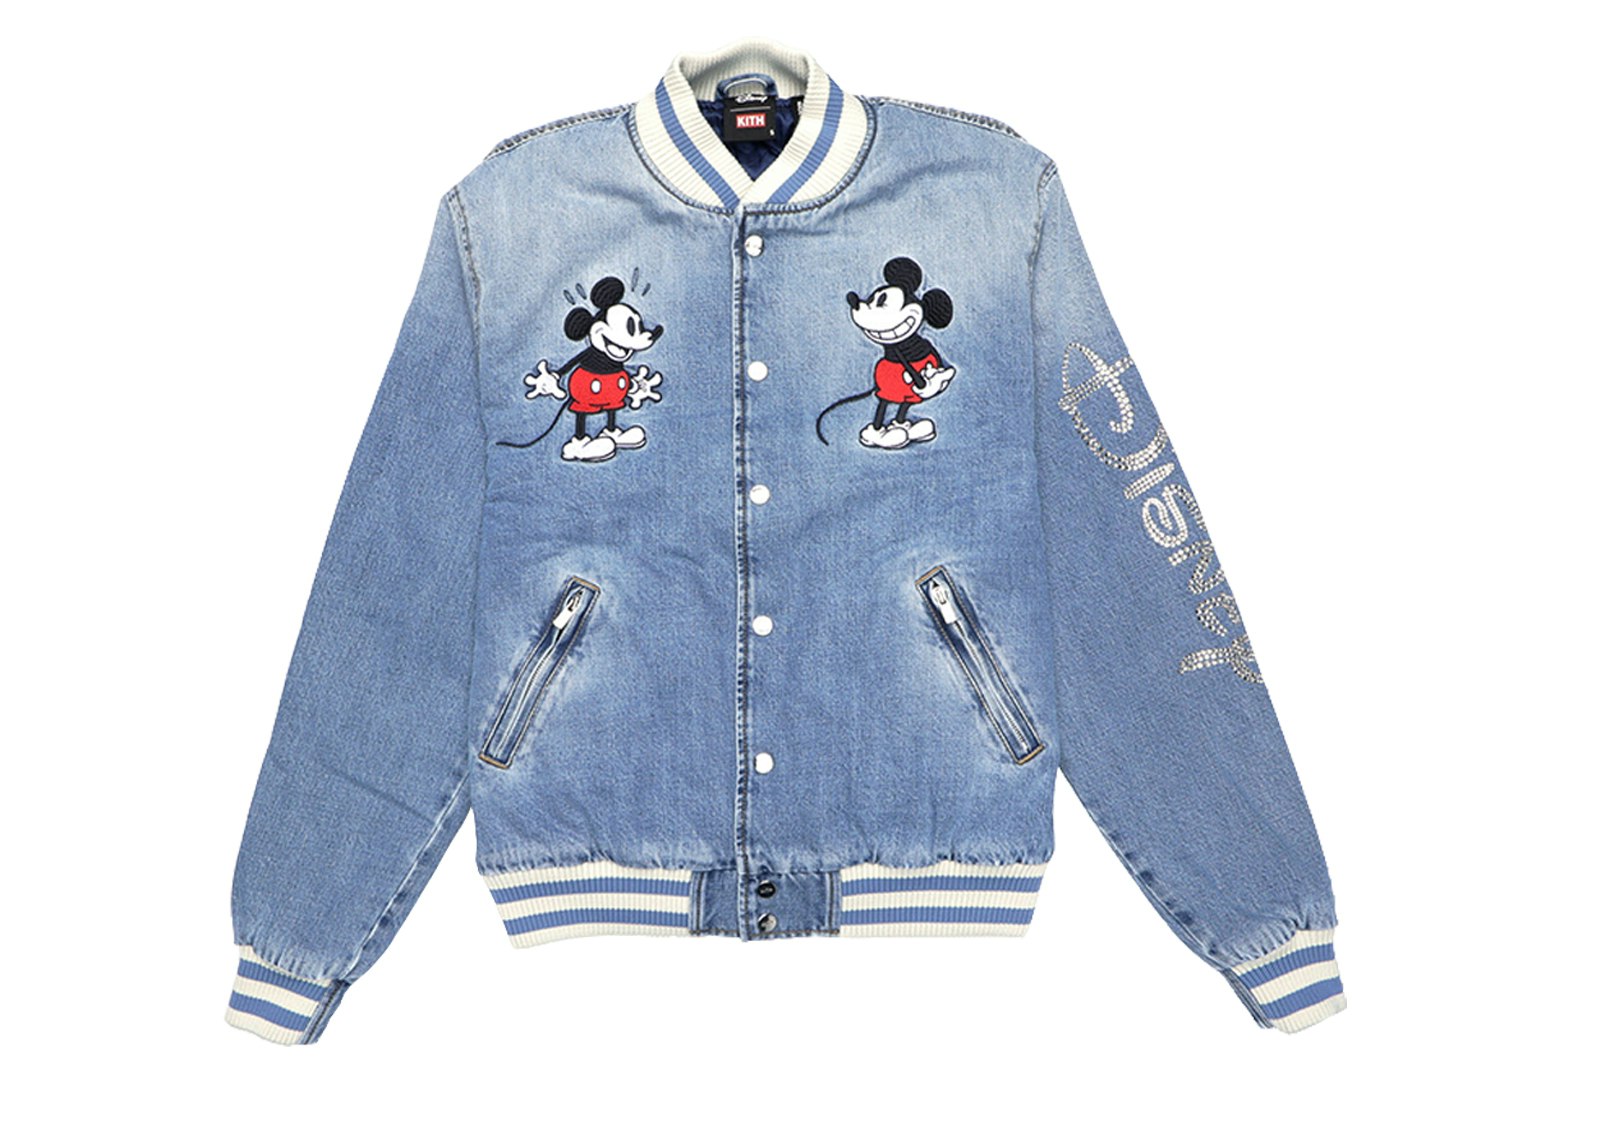 Vintage 90's Disney Denim Varsity Bomber Jacket 1928 Mickey Mouse League L  size, Men's Fashion, Coats, Jackets and Outerwear on Carousell